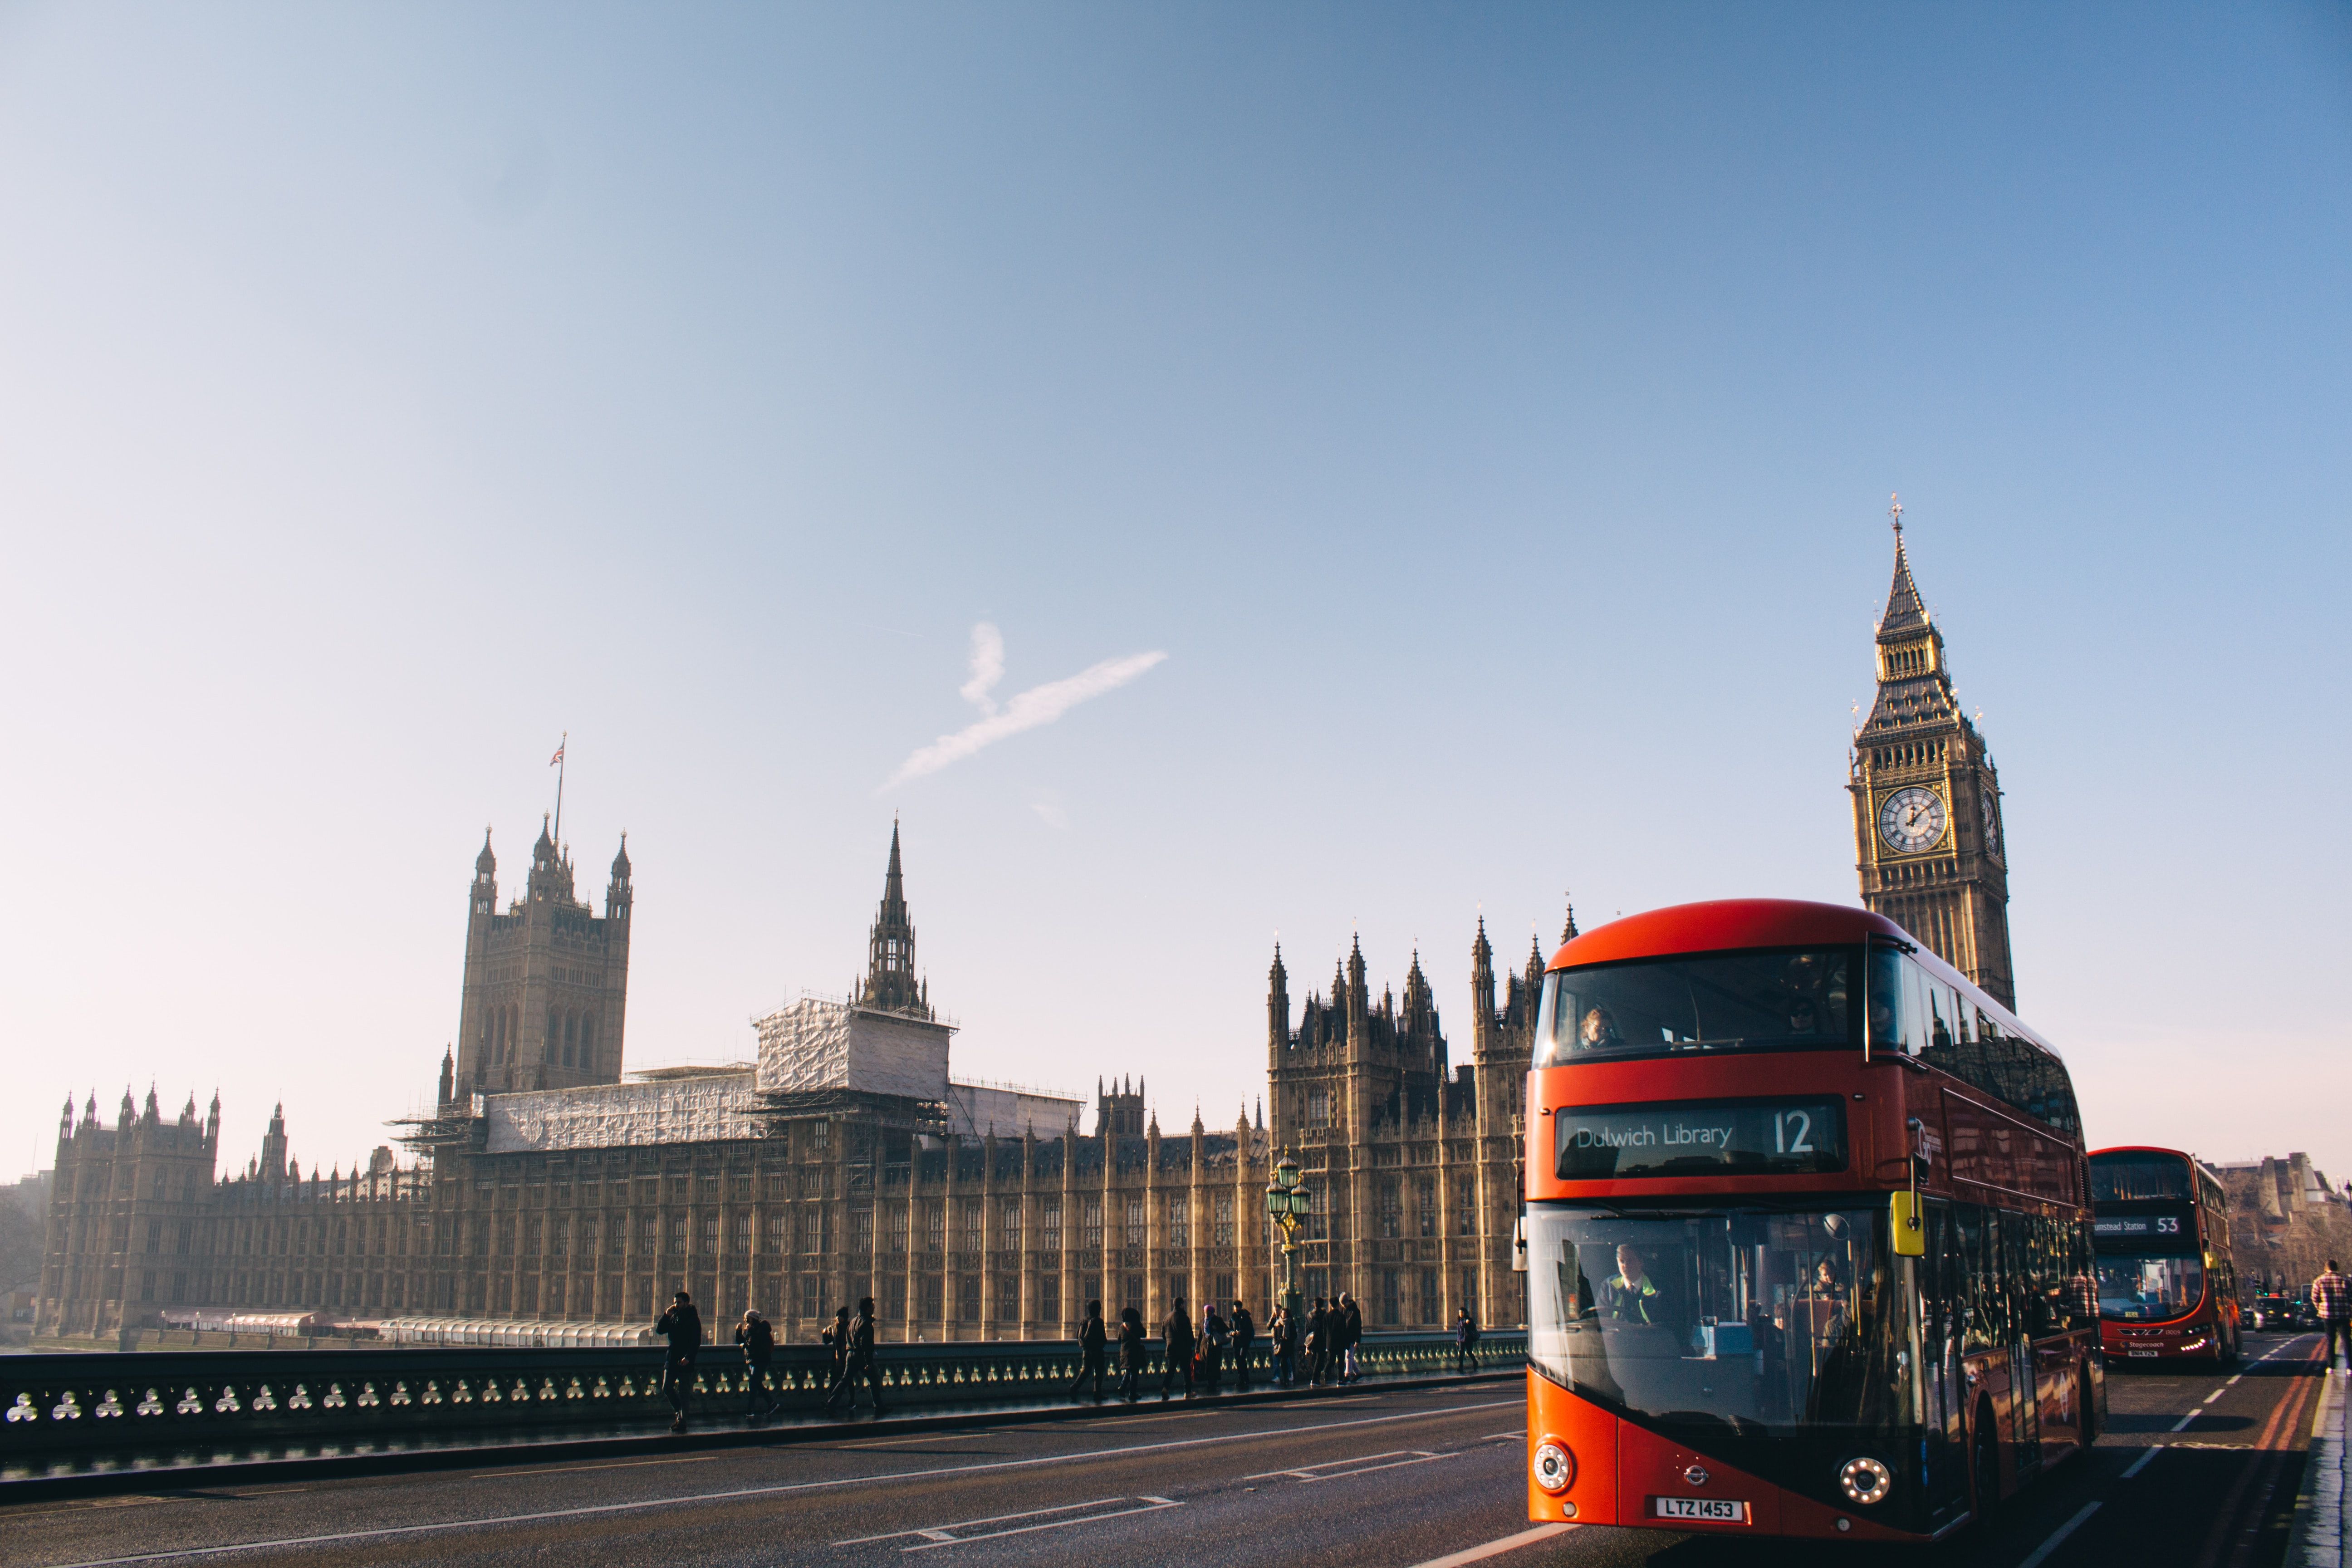 Red Double Decker Bus Passing Palace Of Westminster, London During Daytime Photo